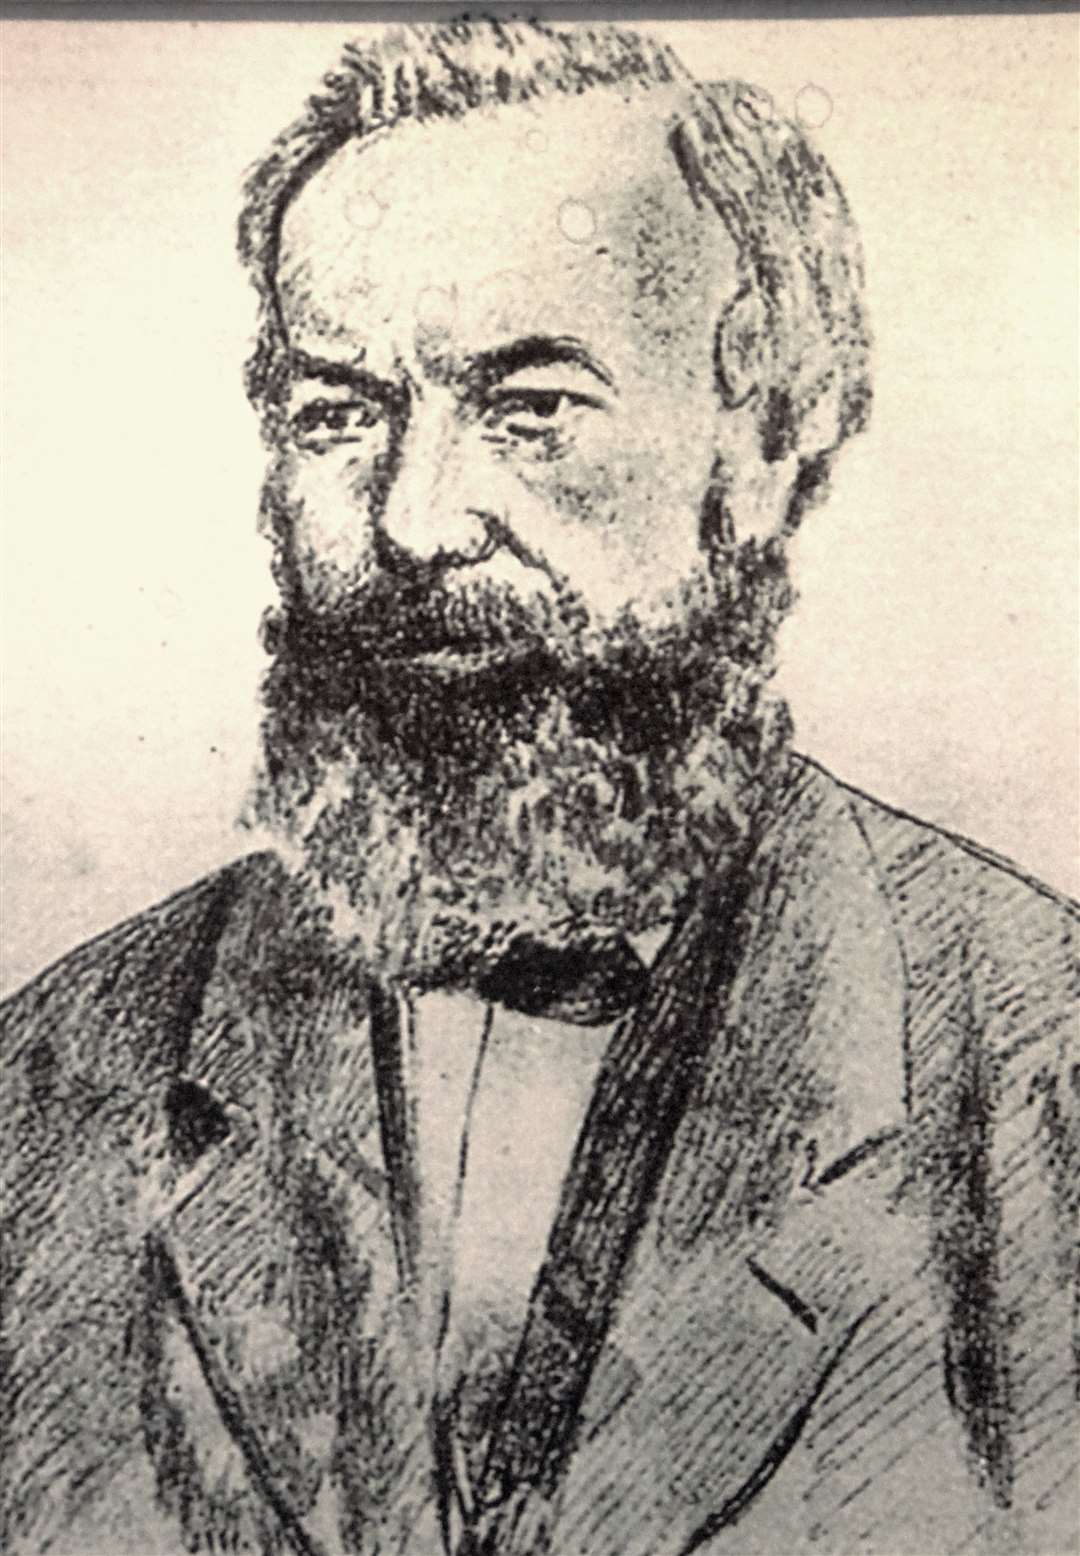 This is the Alexander Bain whose face should have graced the pub sign.